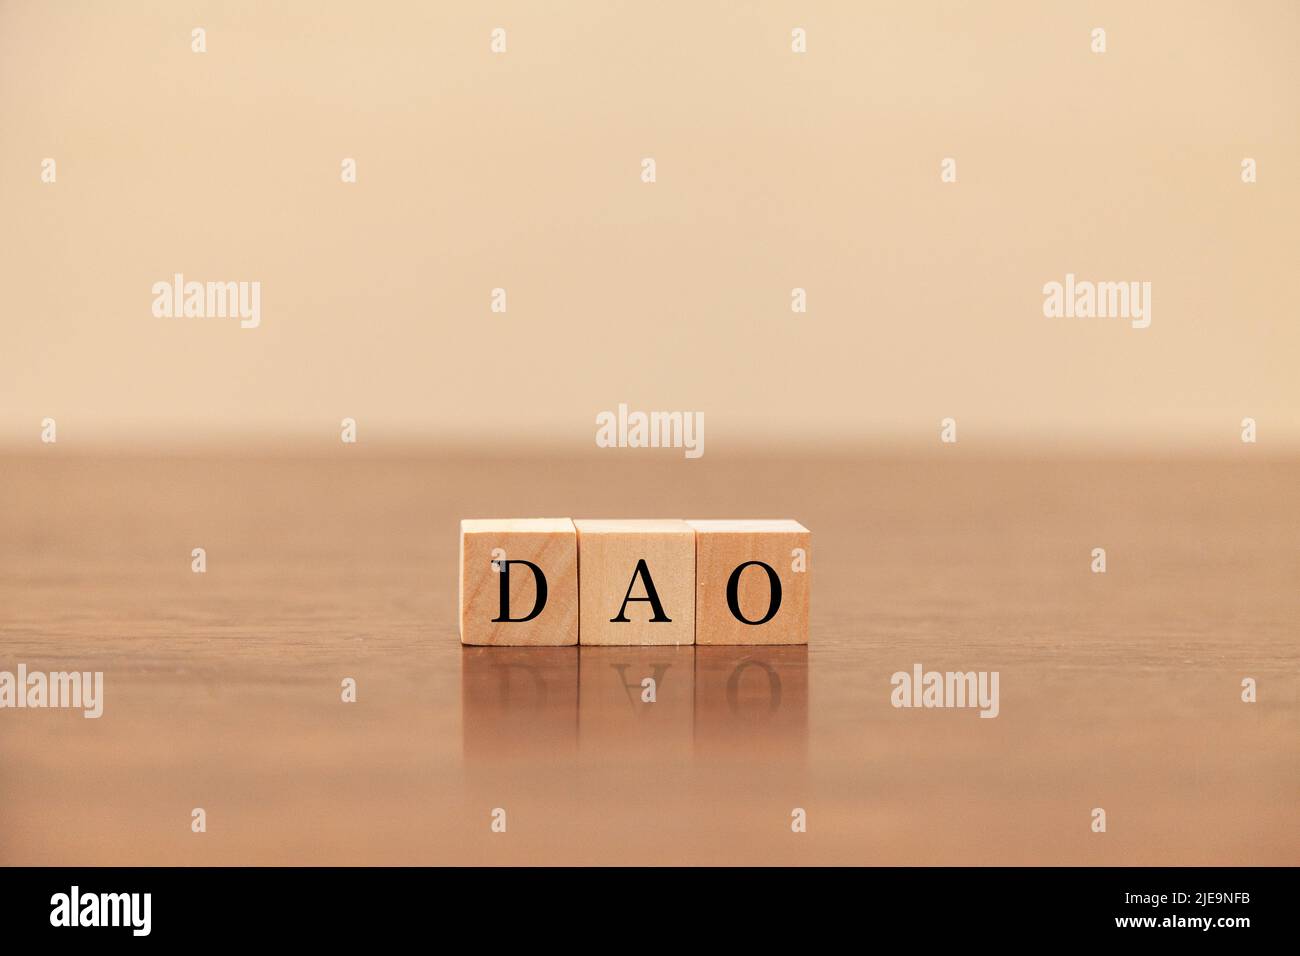 DAO characters. Decentralized autonomous organization. Written on three wooden blocks. Black letters. Wooden table background. Stock Photo